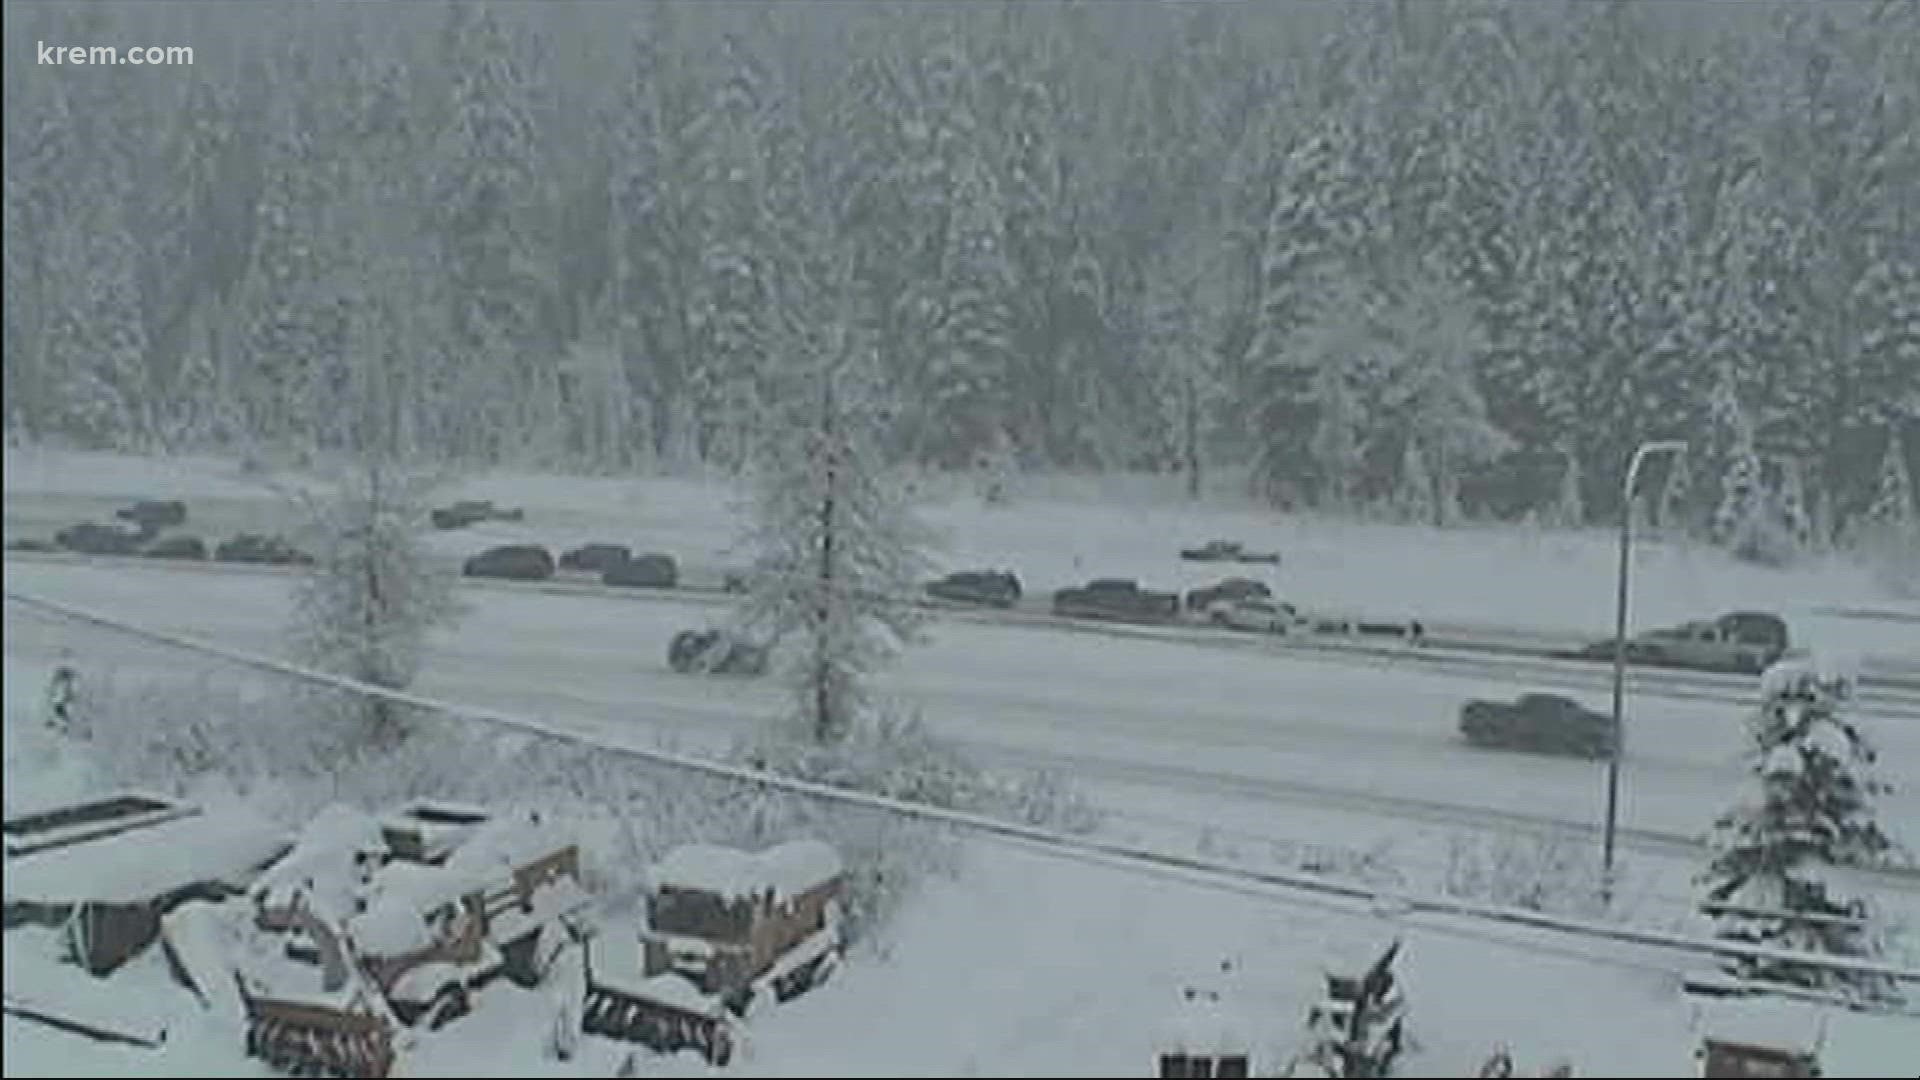 Travel over the pass is made possible by crews working around the clock to keep roadways clear and safe for drivers.